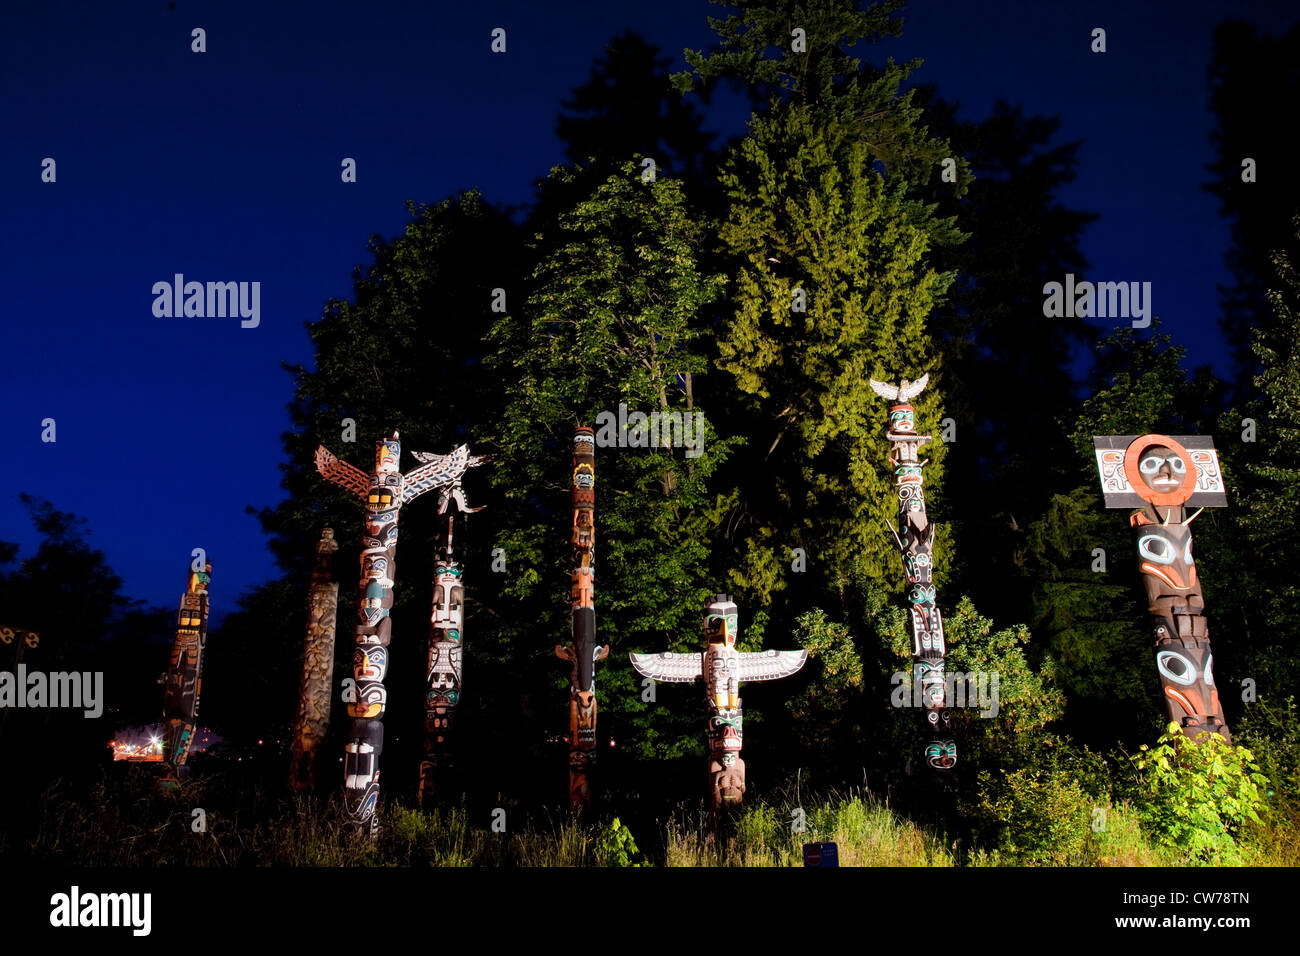 totem poles at Stanley Park at night, Canada, British Columbia, Vancouver Stock Photo